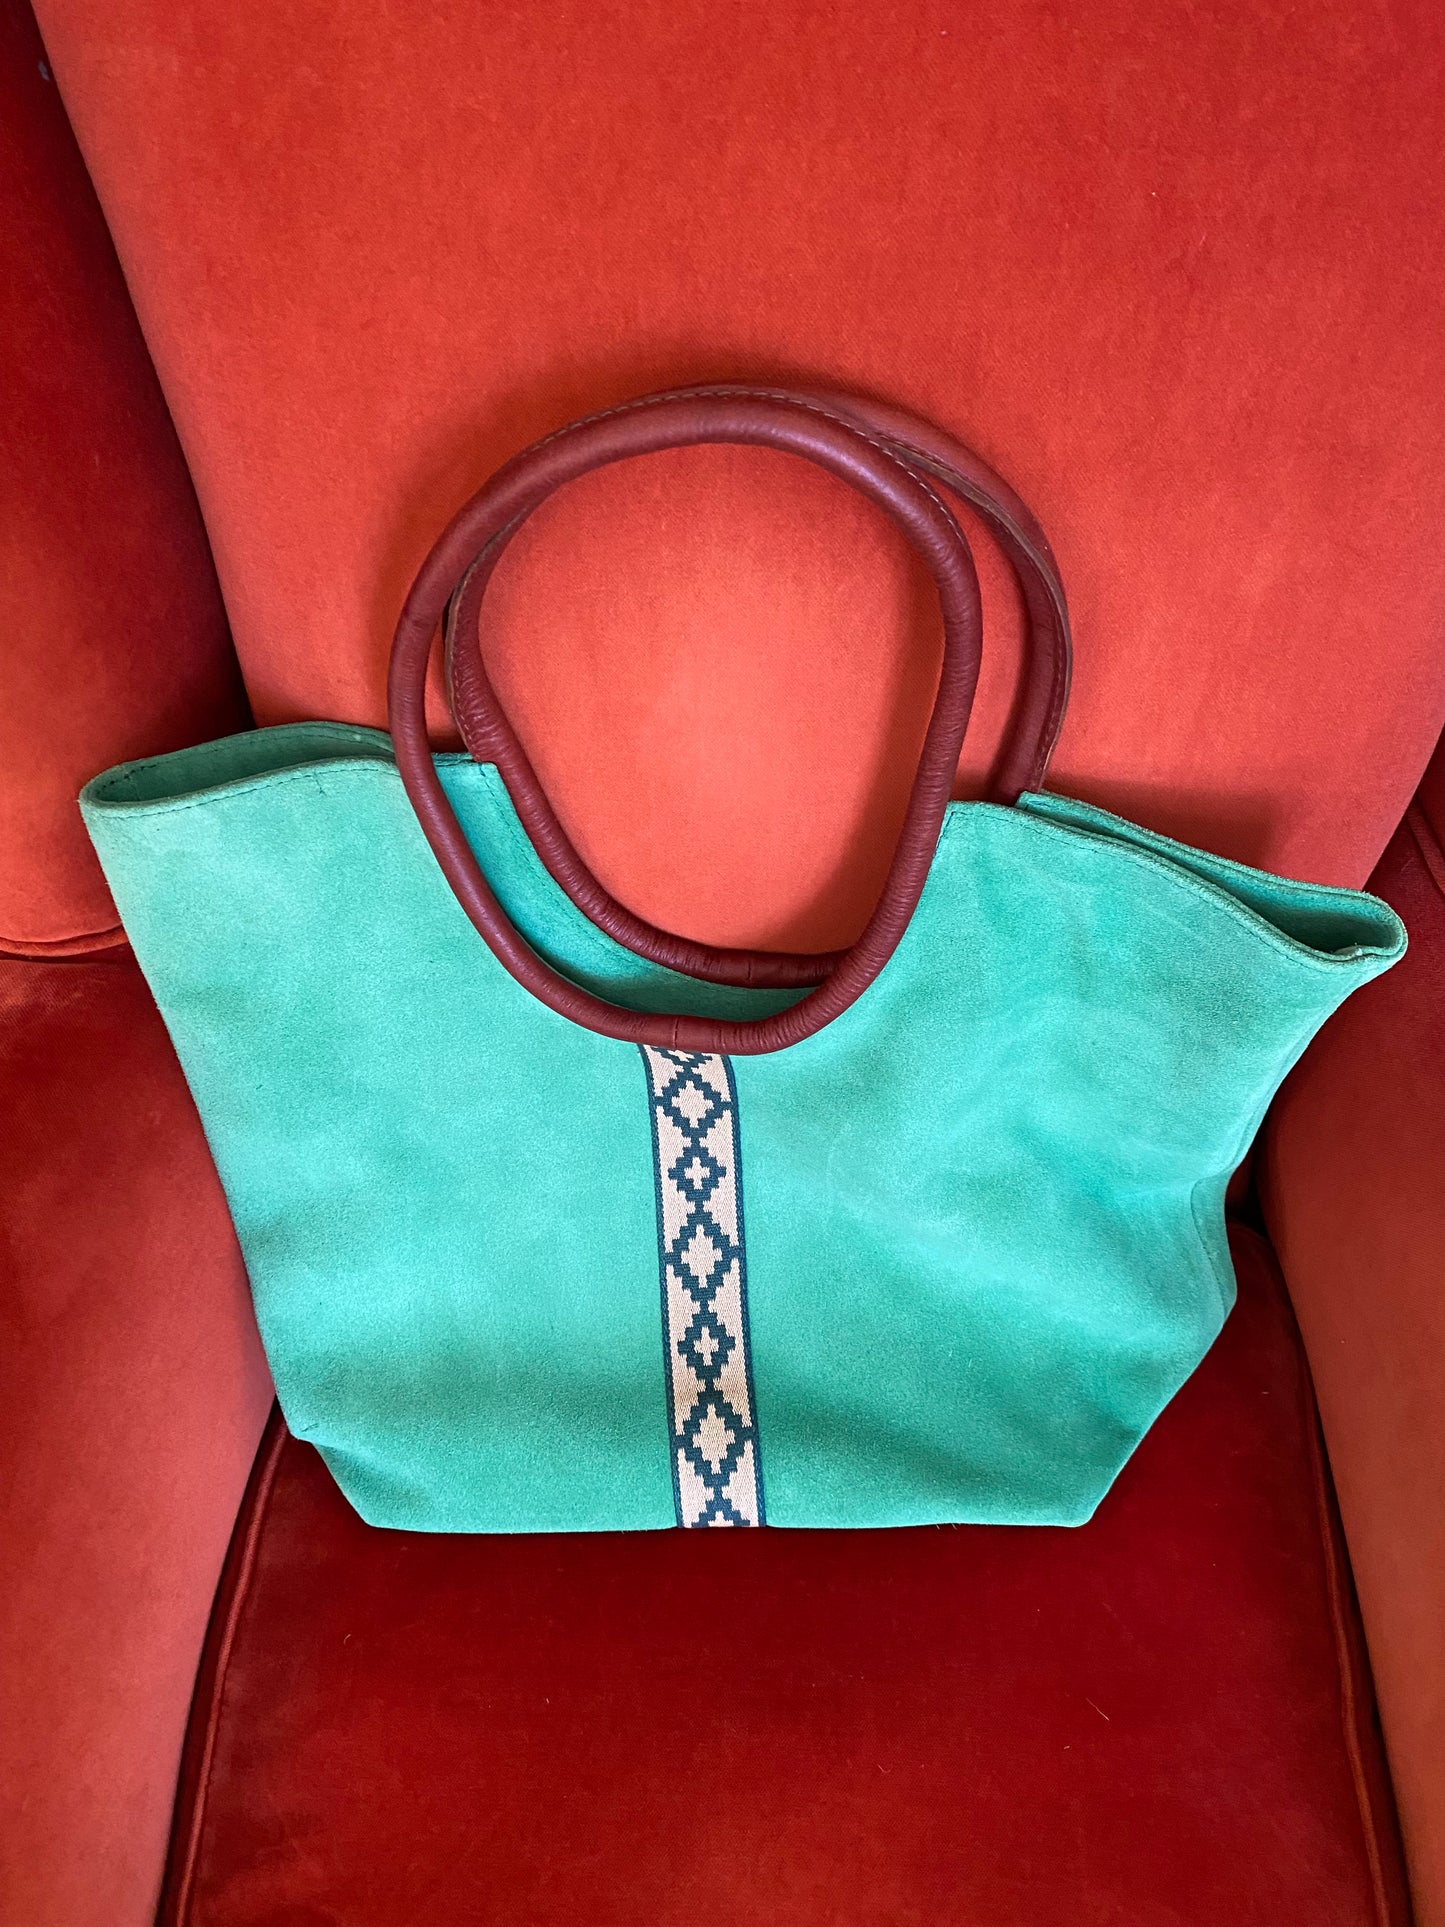 Turquoise Suede Leather Bag